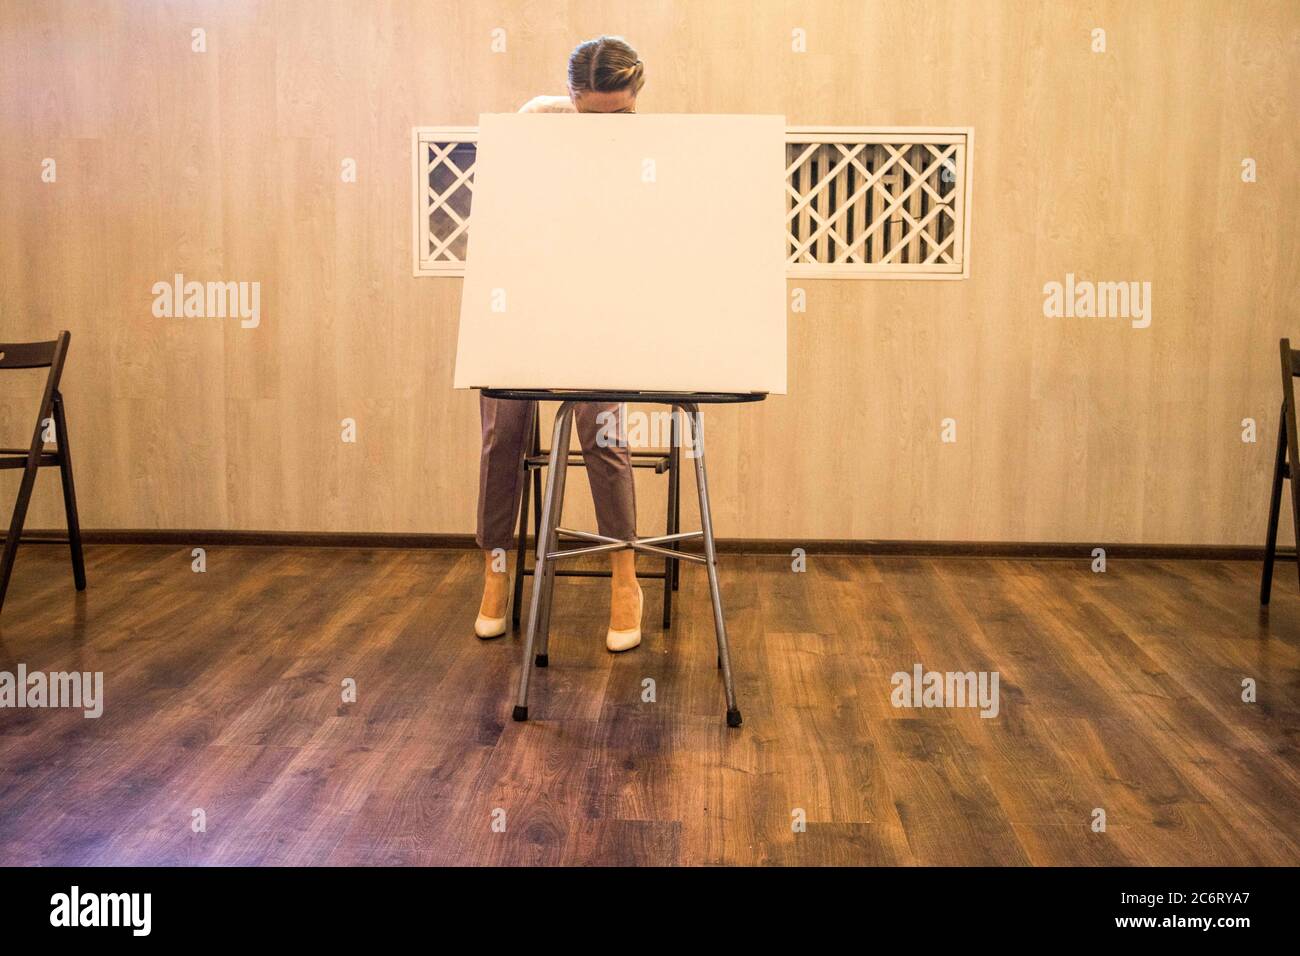 Poznan, Wielkopolska, Poland. 12th July, 2020. The second - decisive - round of the presidential election in Poland began at 7 am and will last until 9 pm. In the picture: disinfection of the voting table at the polling station. Credit: Dawid Tatarkiewicz/ZUMA Wire/Alamy Live News Stock Photo